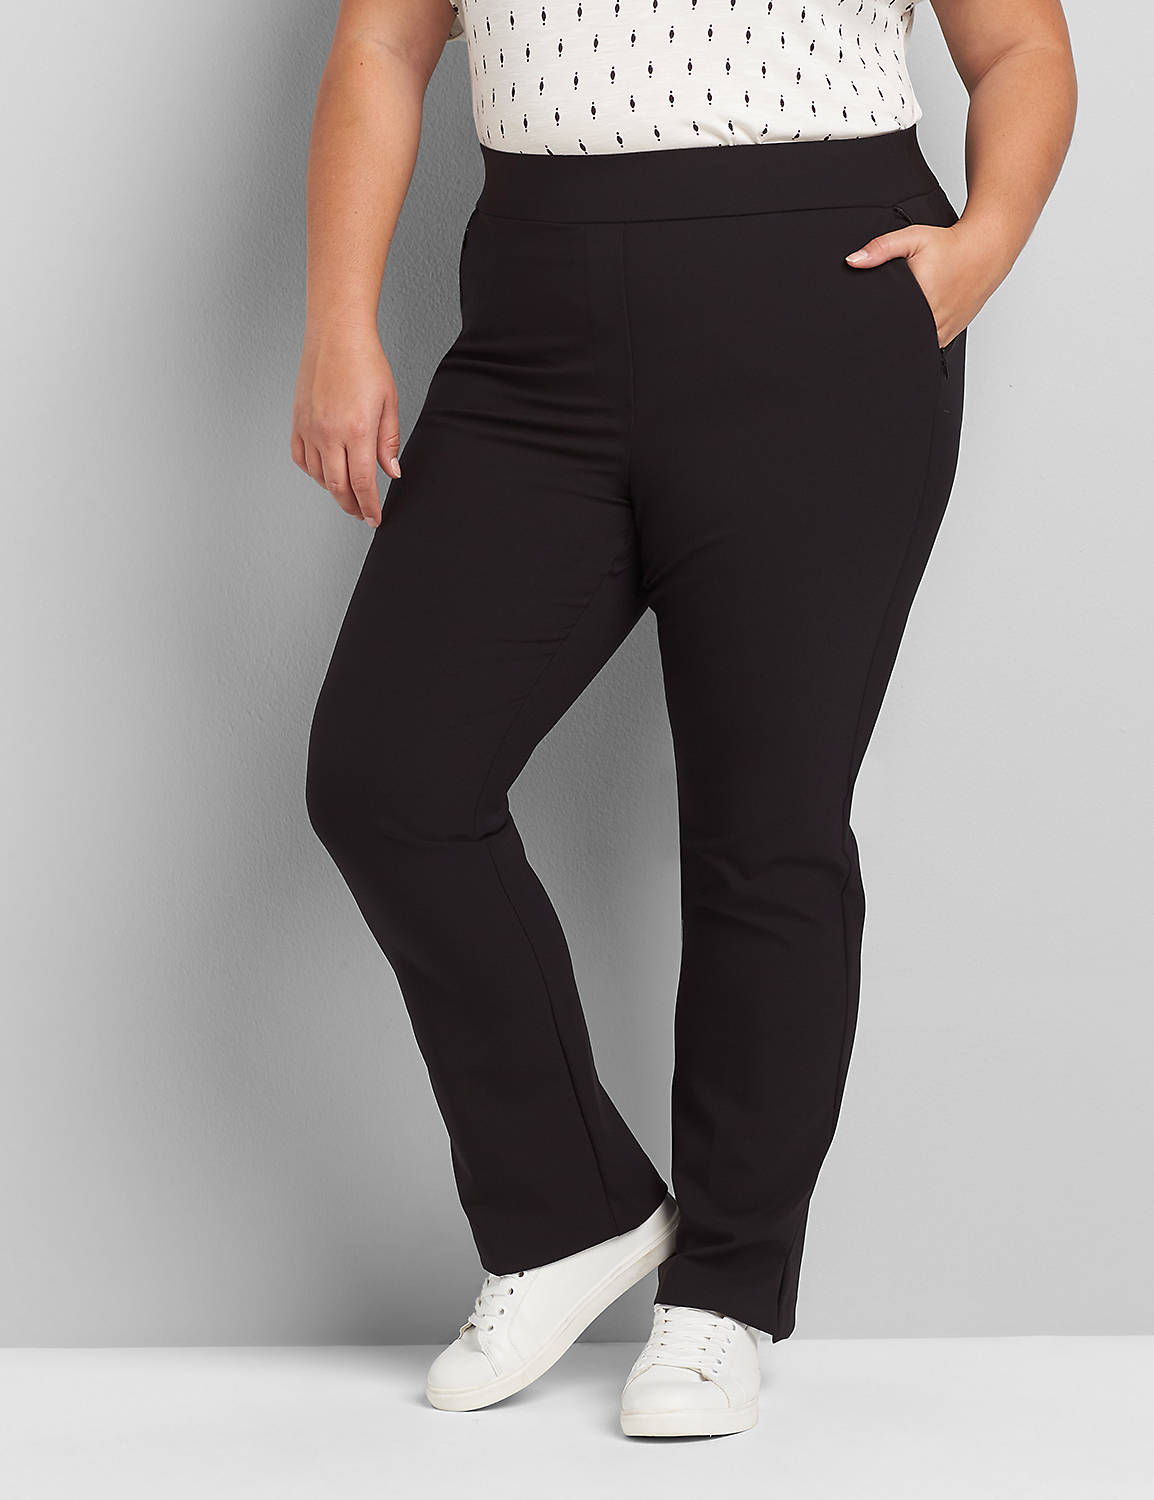 On-The-Go Straight Pant 1114355:Pitch Black LB 1000322:14 Product Image 1